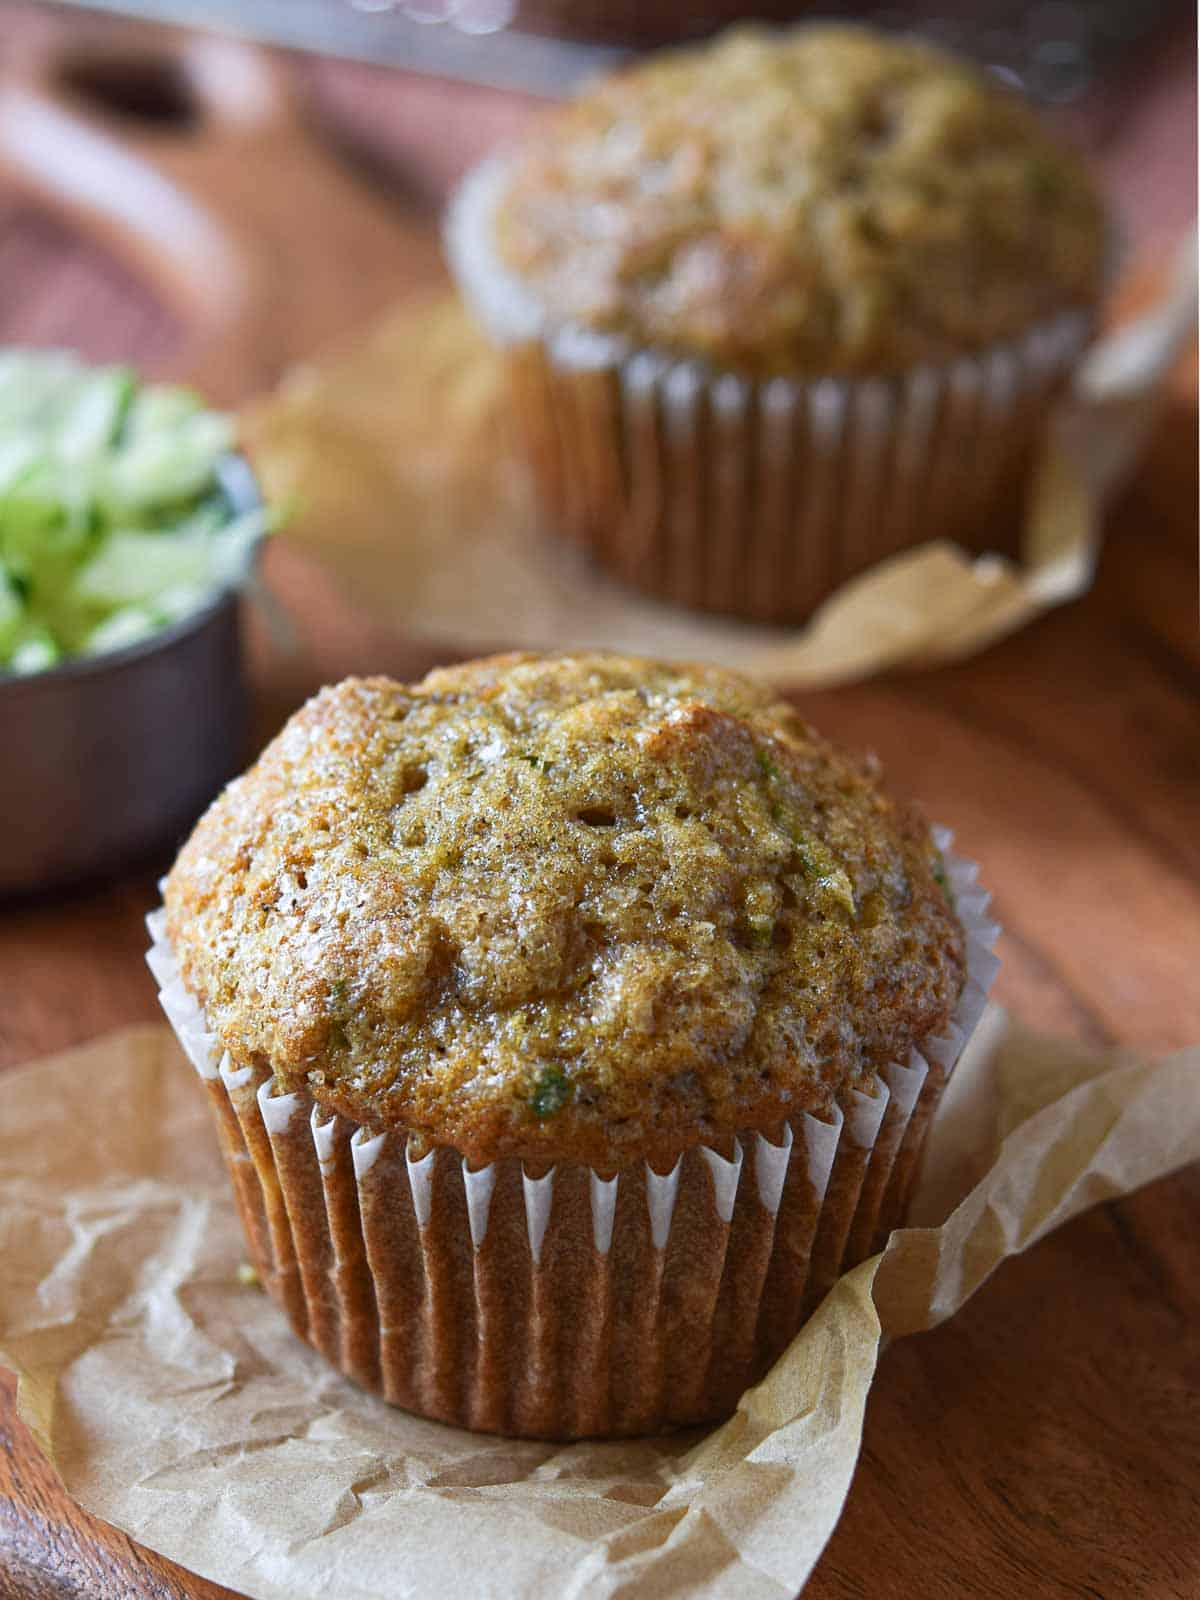 Two muffins on a wood surface with shredded zucchini in the background.